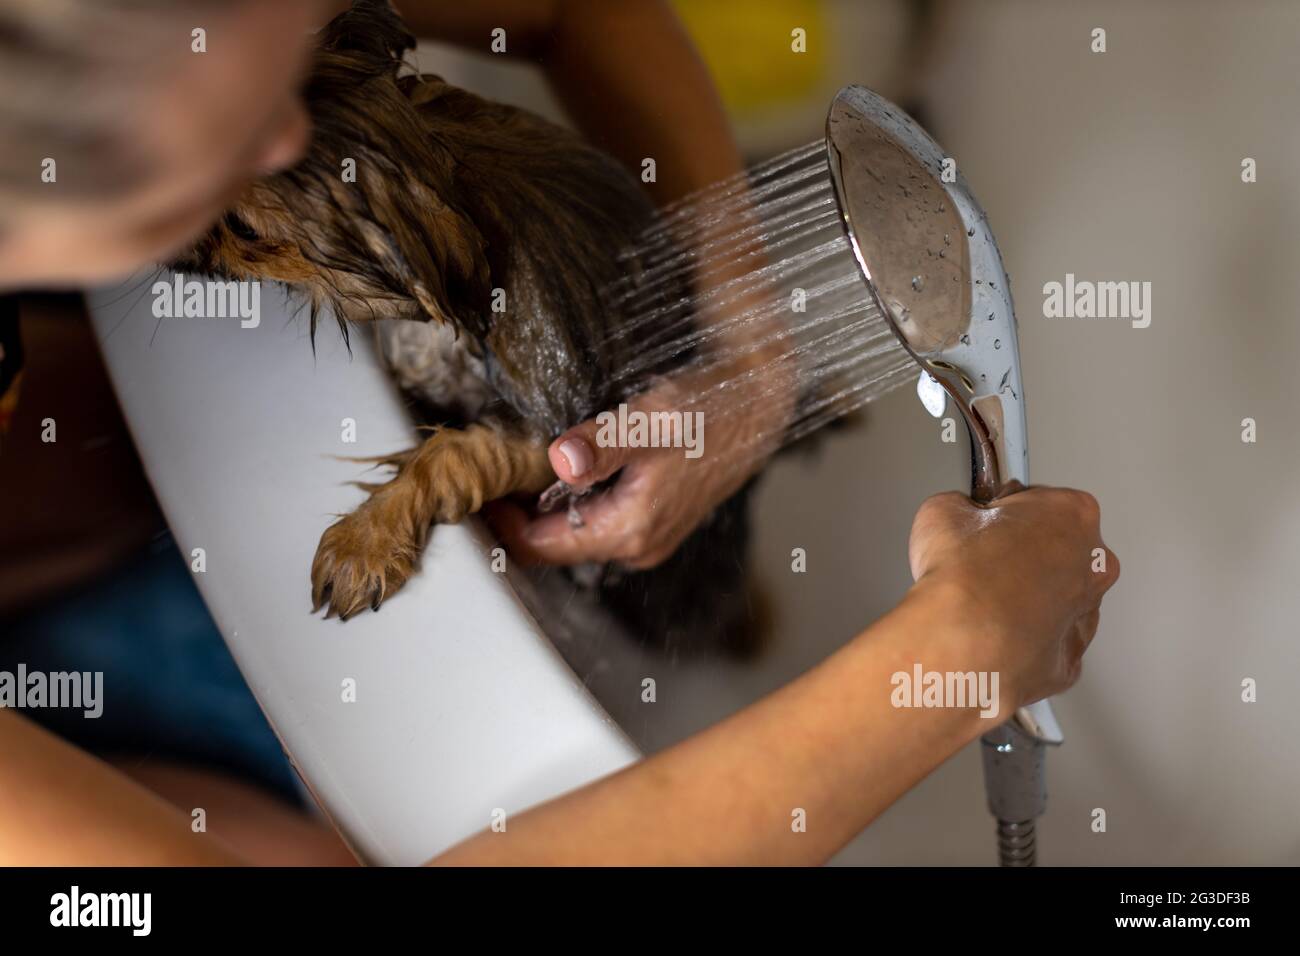 Woman taking care of her little dog. Female washing, cleaning dachshund under the shower. Animals hygiene concept. Stock Photo